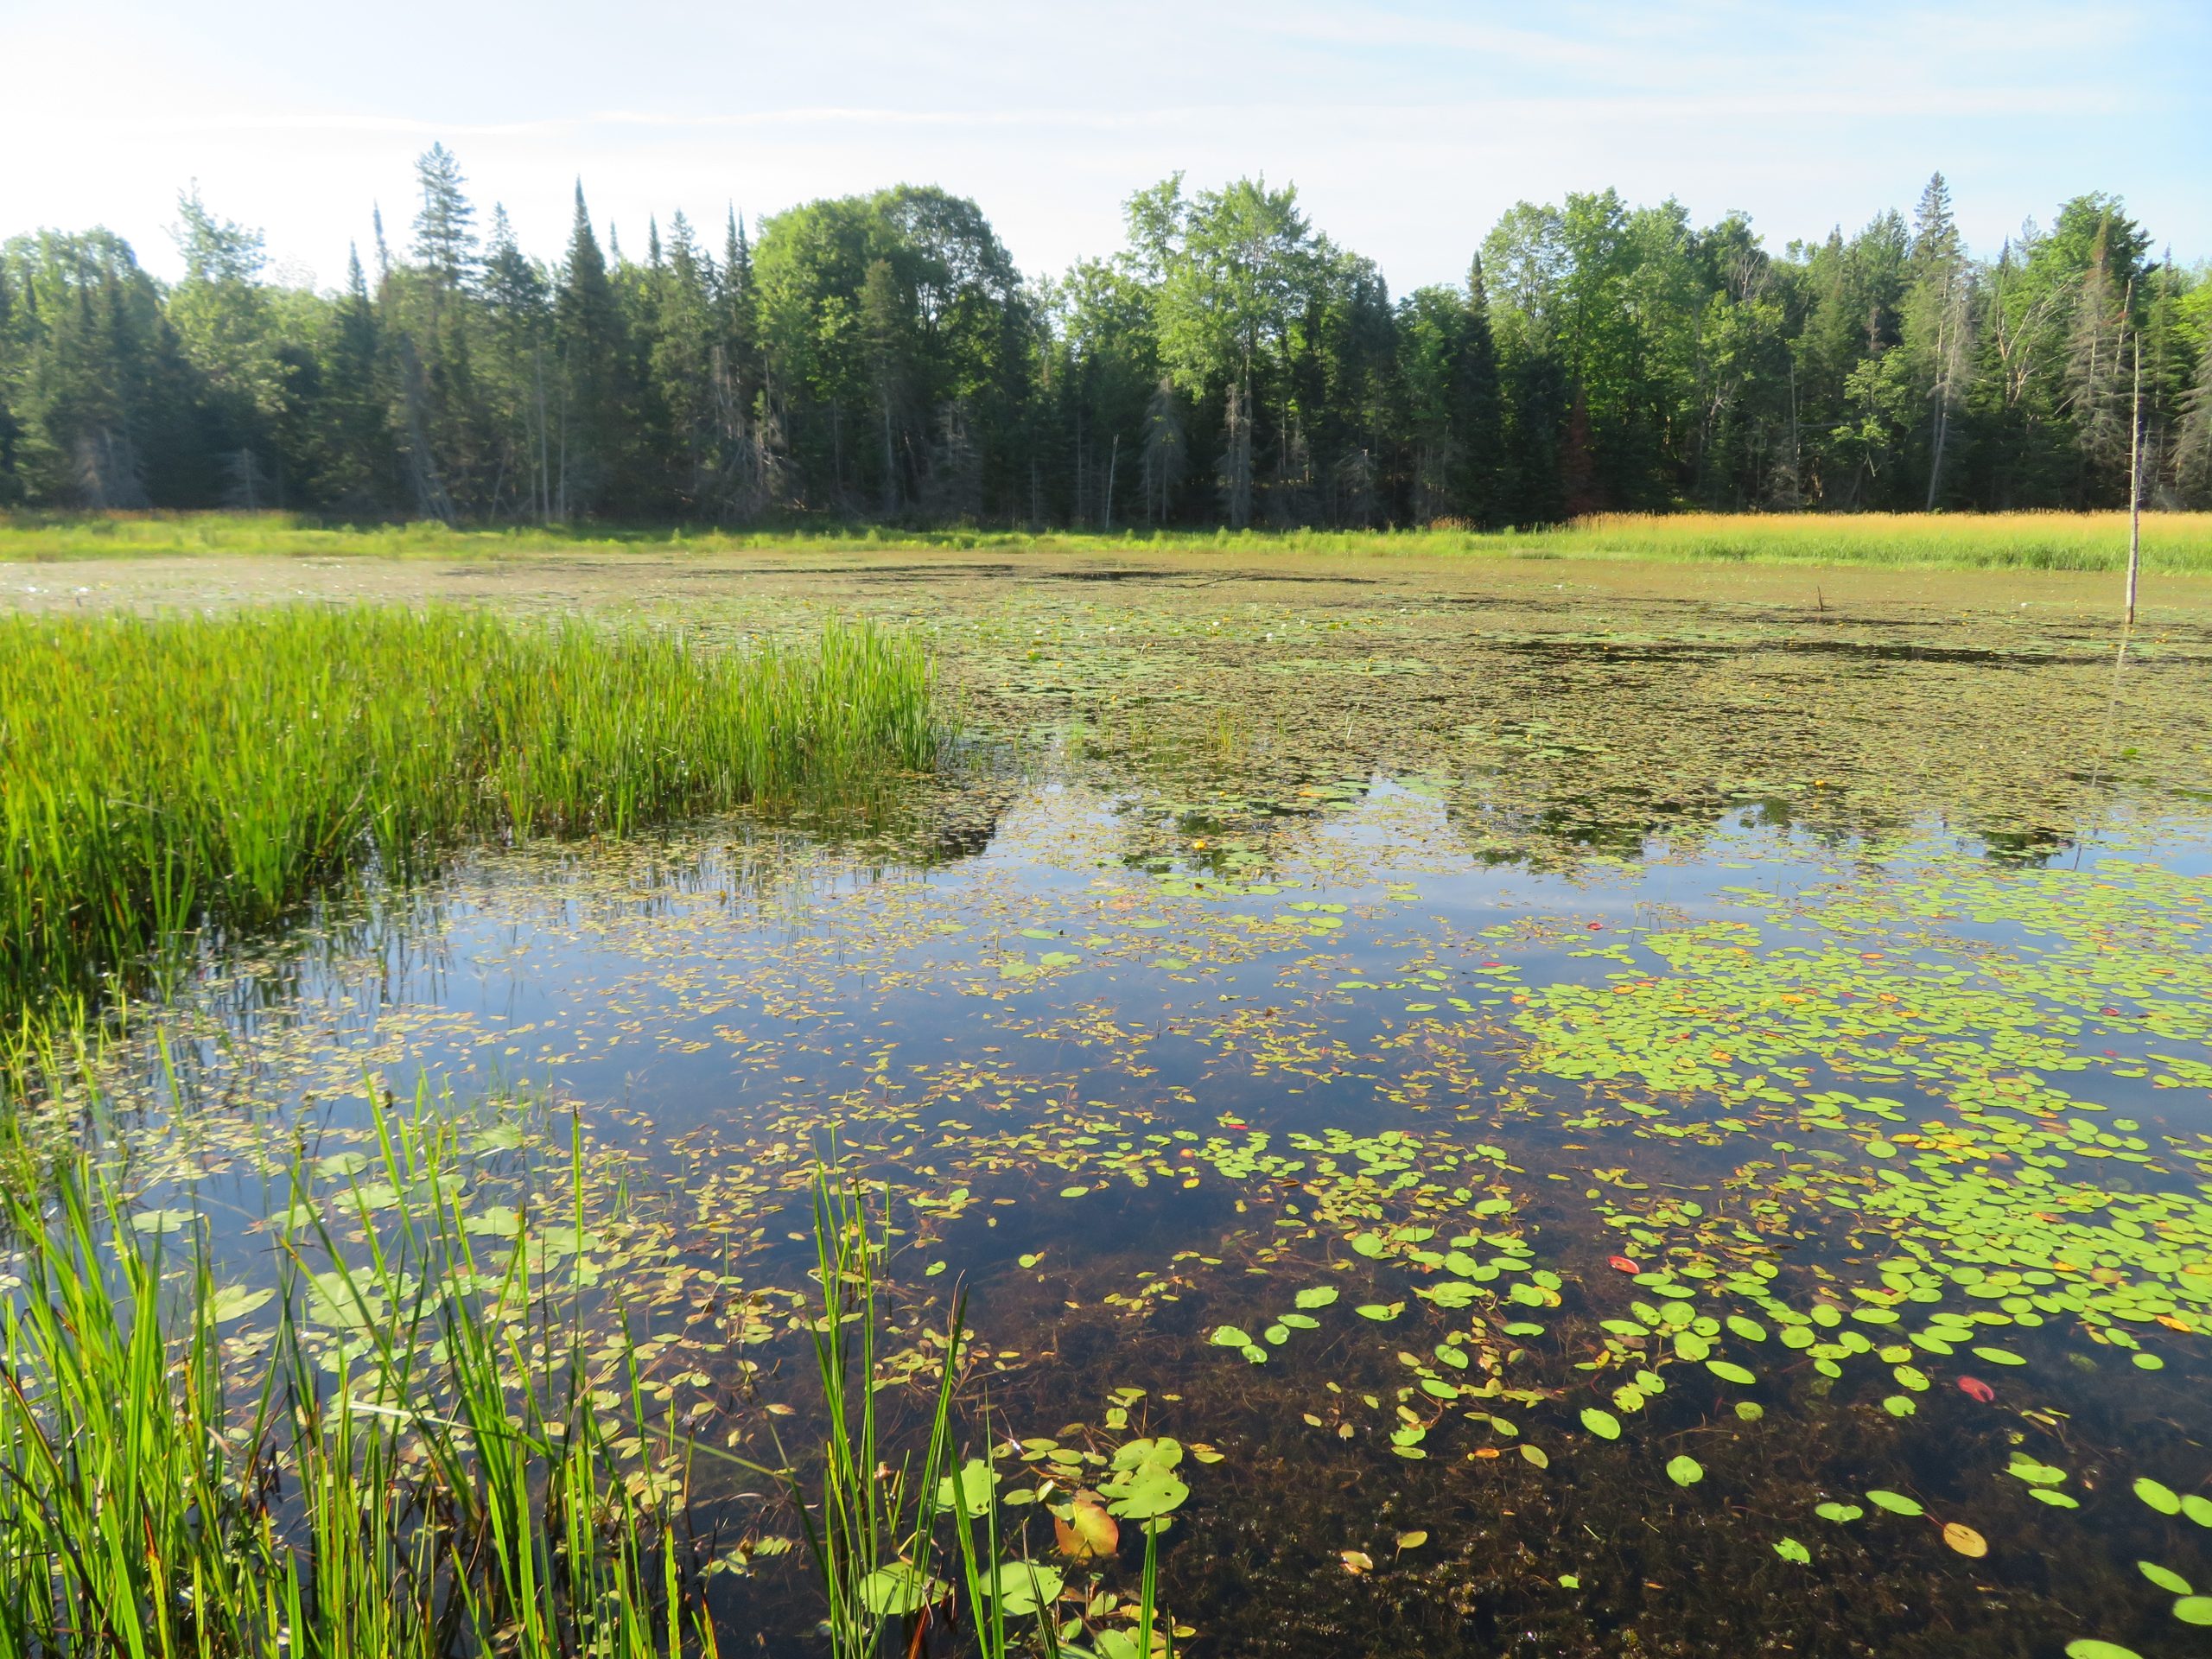 This wetland was once a drained depression in an agricultural landscape. It is now part of a provincially significant wetland and supports seven species of breeding frogs, as well as providing habitat for the endangered Blanding’s Turtle. Paul and Cathy Keddy bought this wetland, restored it, and then donated an easement with the local land trust to ensure the property is protected in perpetuity.